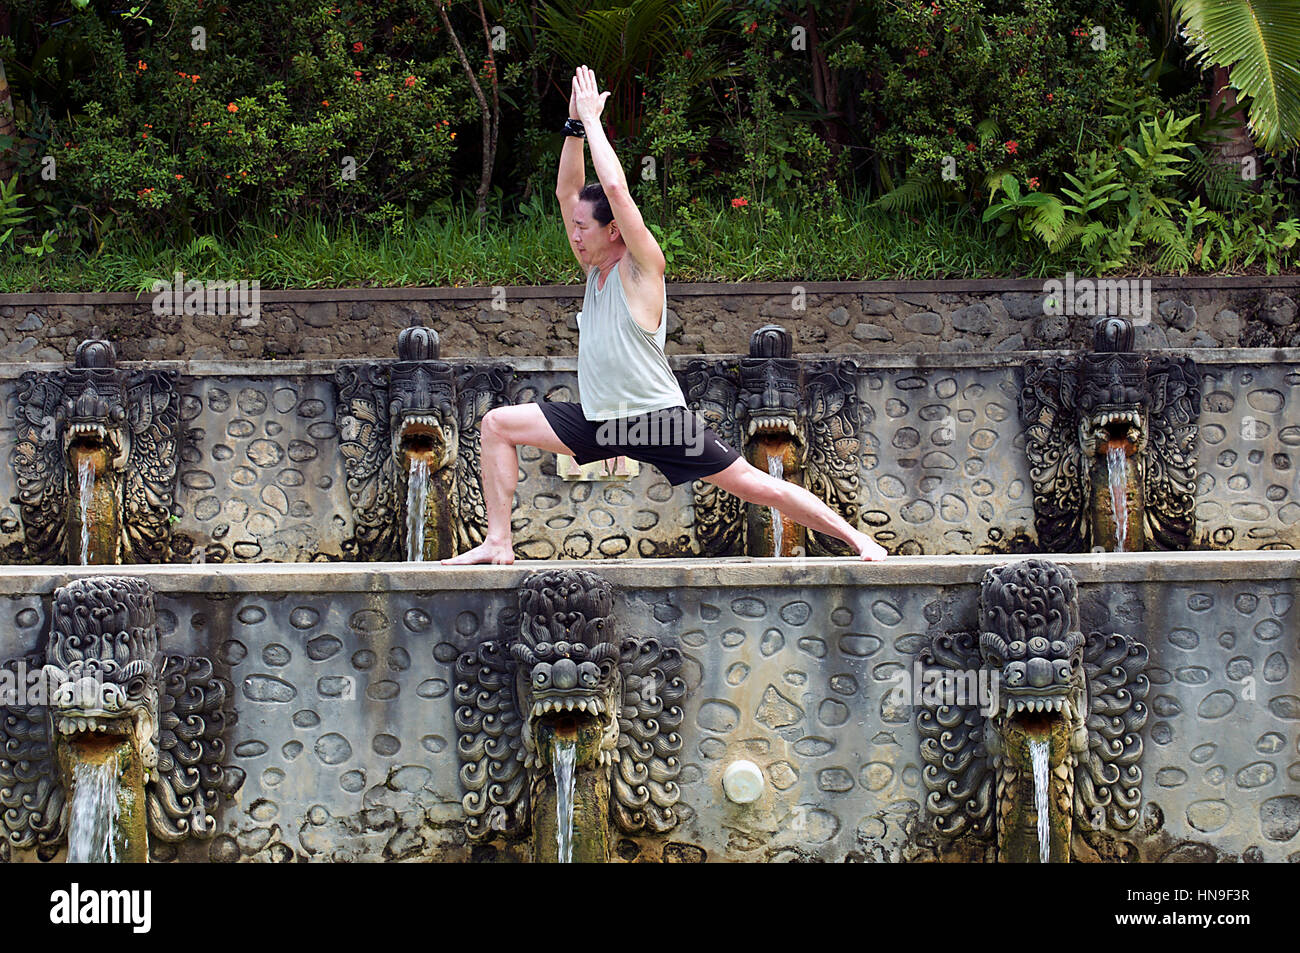 Middle-Aged Asian Man Holds a Hatha Warrior Yoga Pose at Banjar Hot Springs Pools in Bali, Indonesia as Water Pours from Dragon-Like Creatures' Mouths Stock Photo